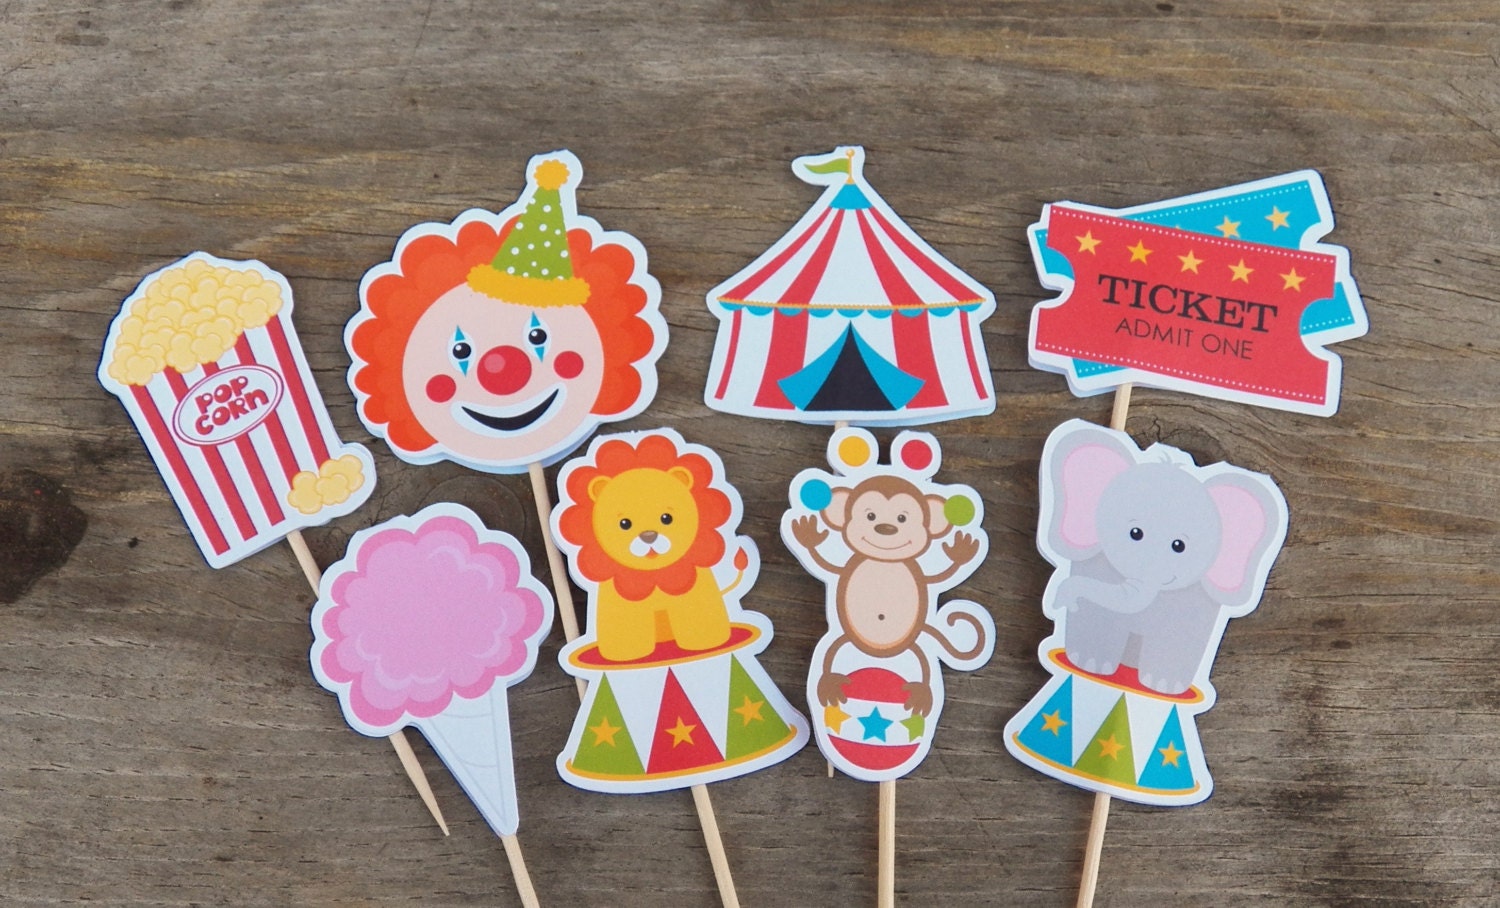 Circus Party - Set of 24 Assorted Big Top Circus Cupcake Toppers by The Birthday House